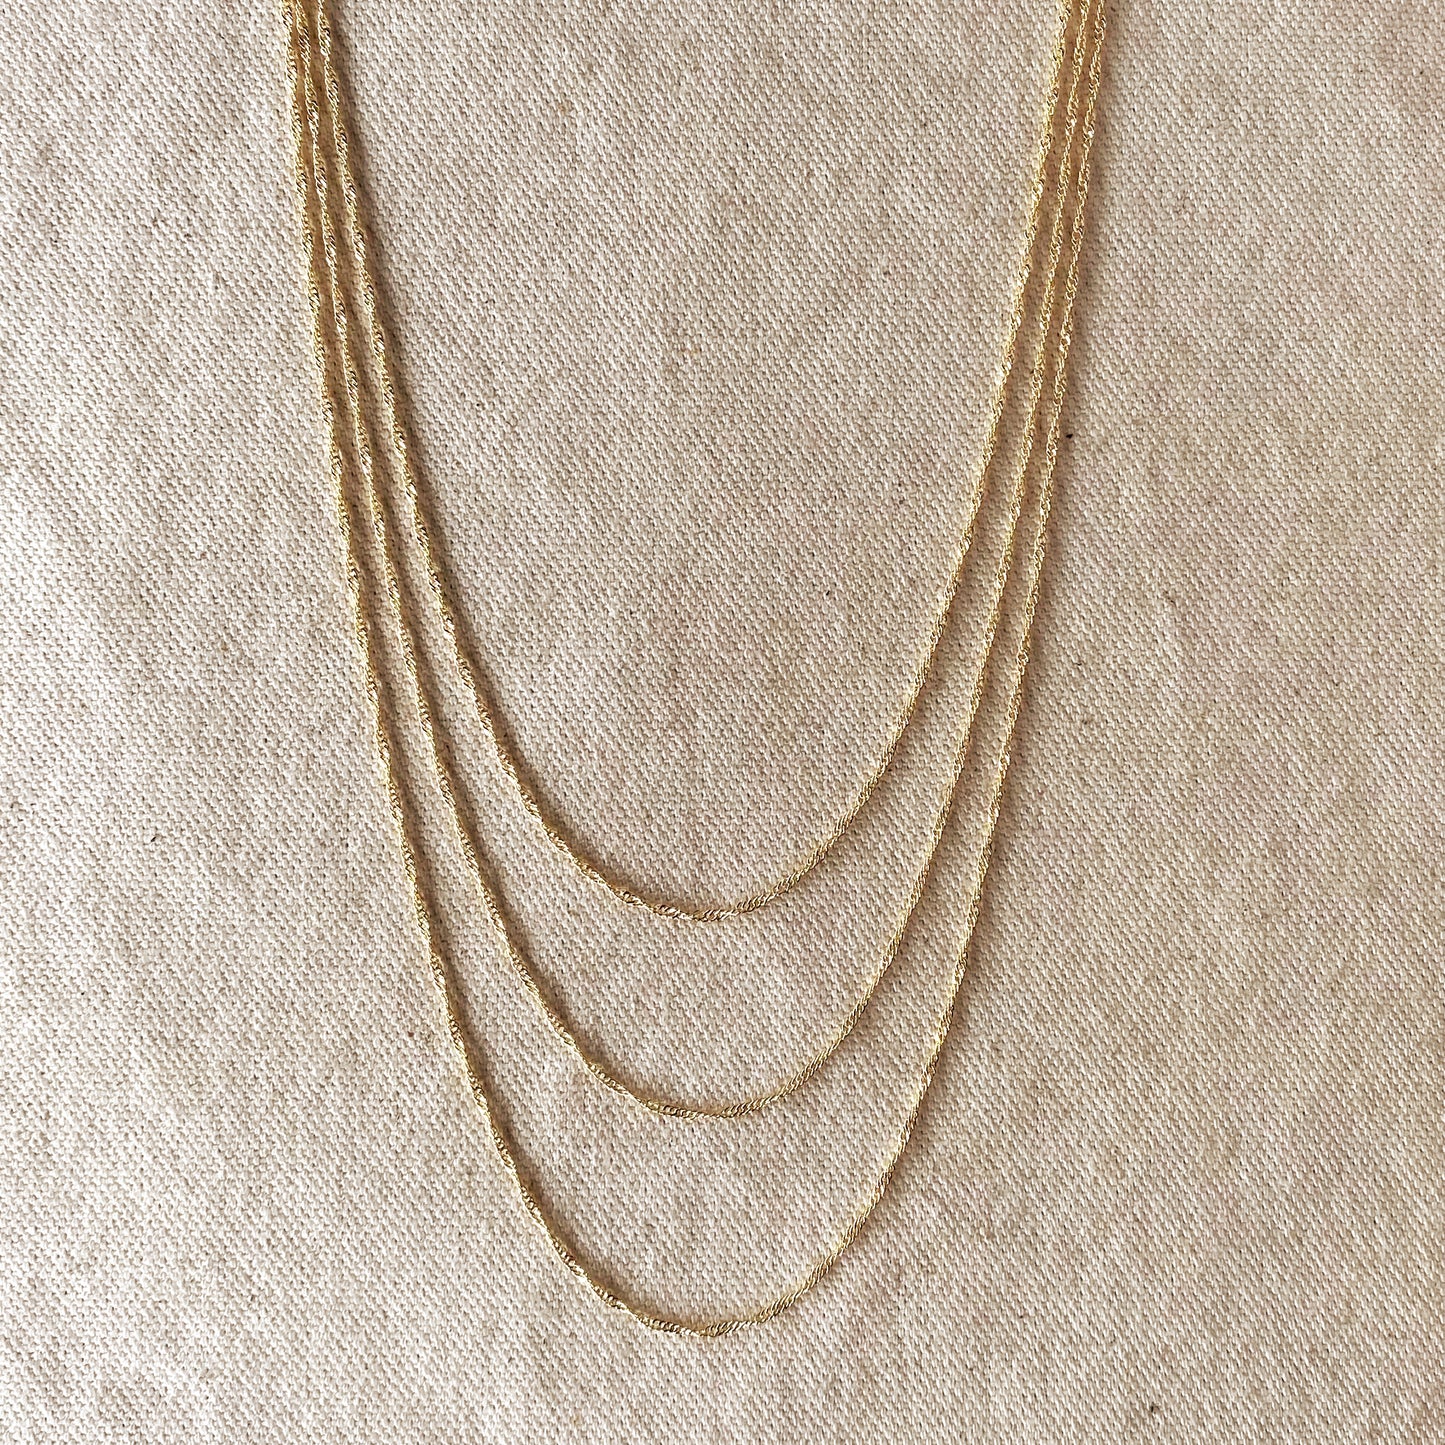 18k Gold Filled 1.7mm Singapore Chain